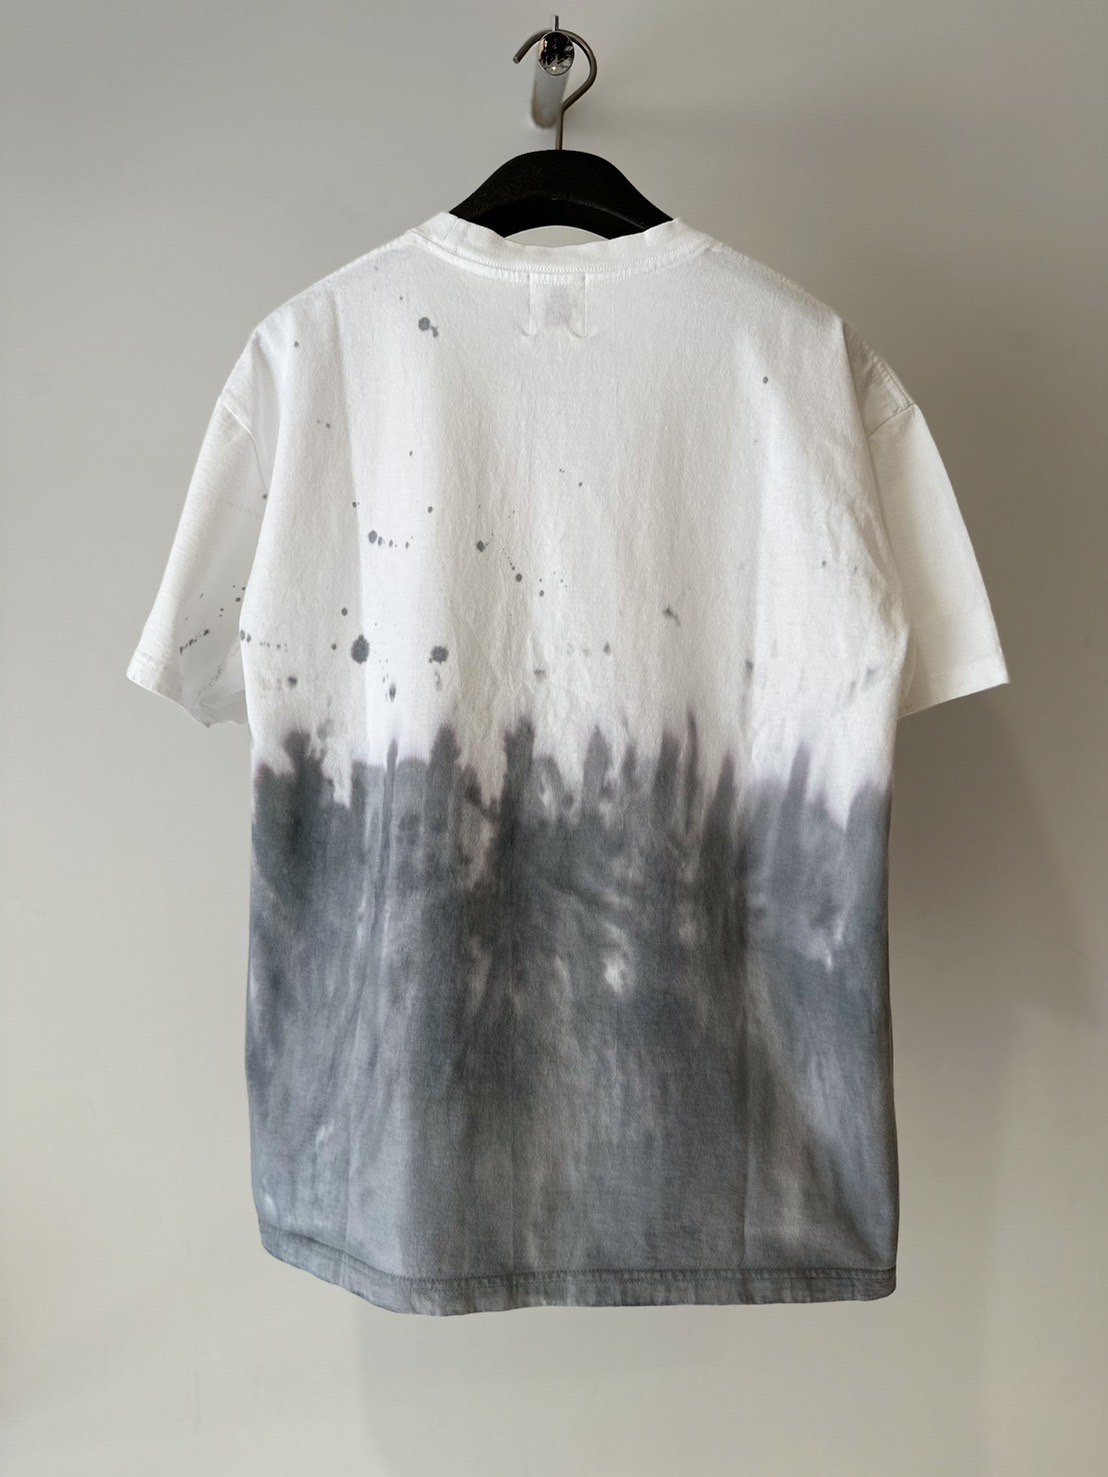 soe<br />Muddy T with ZEPTEPI / WHITE&GRAY<img class='new_mark_img2' src='https://img.shop-pro.jp/img/new/icons14.gif' style='border:none;display:inline;margin:0px;padding:0px;width:auto;' />